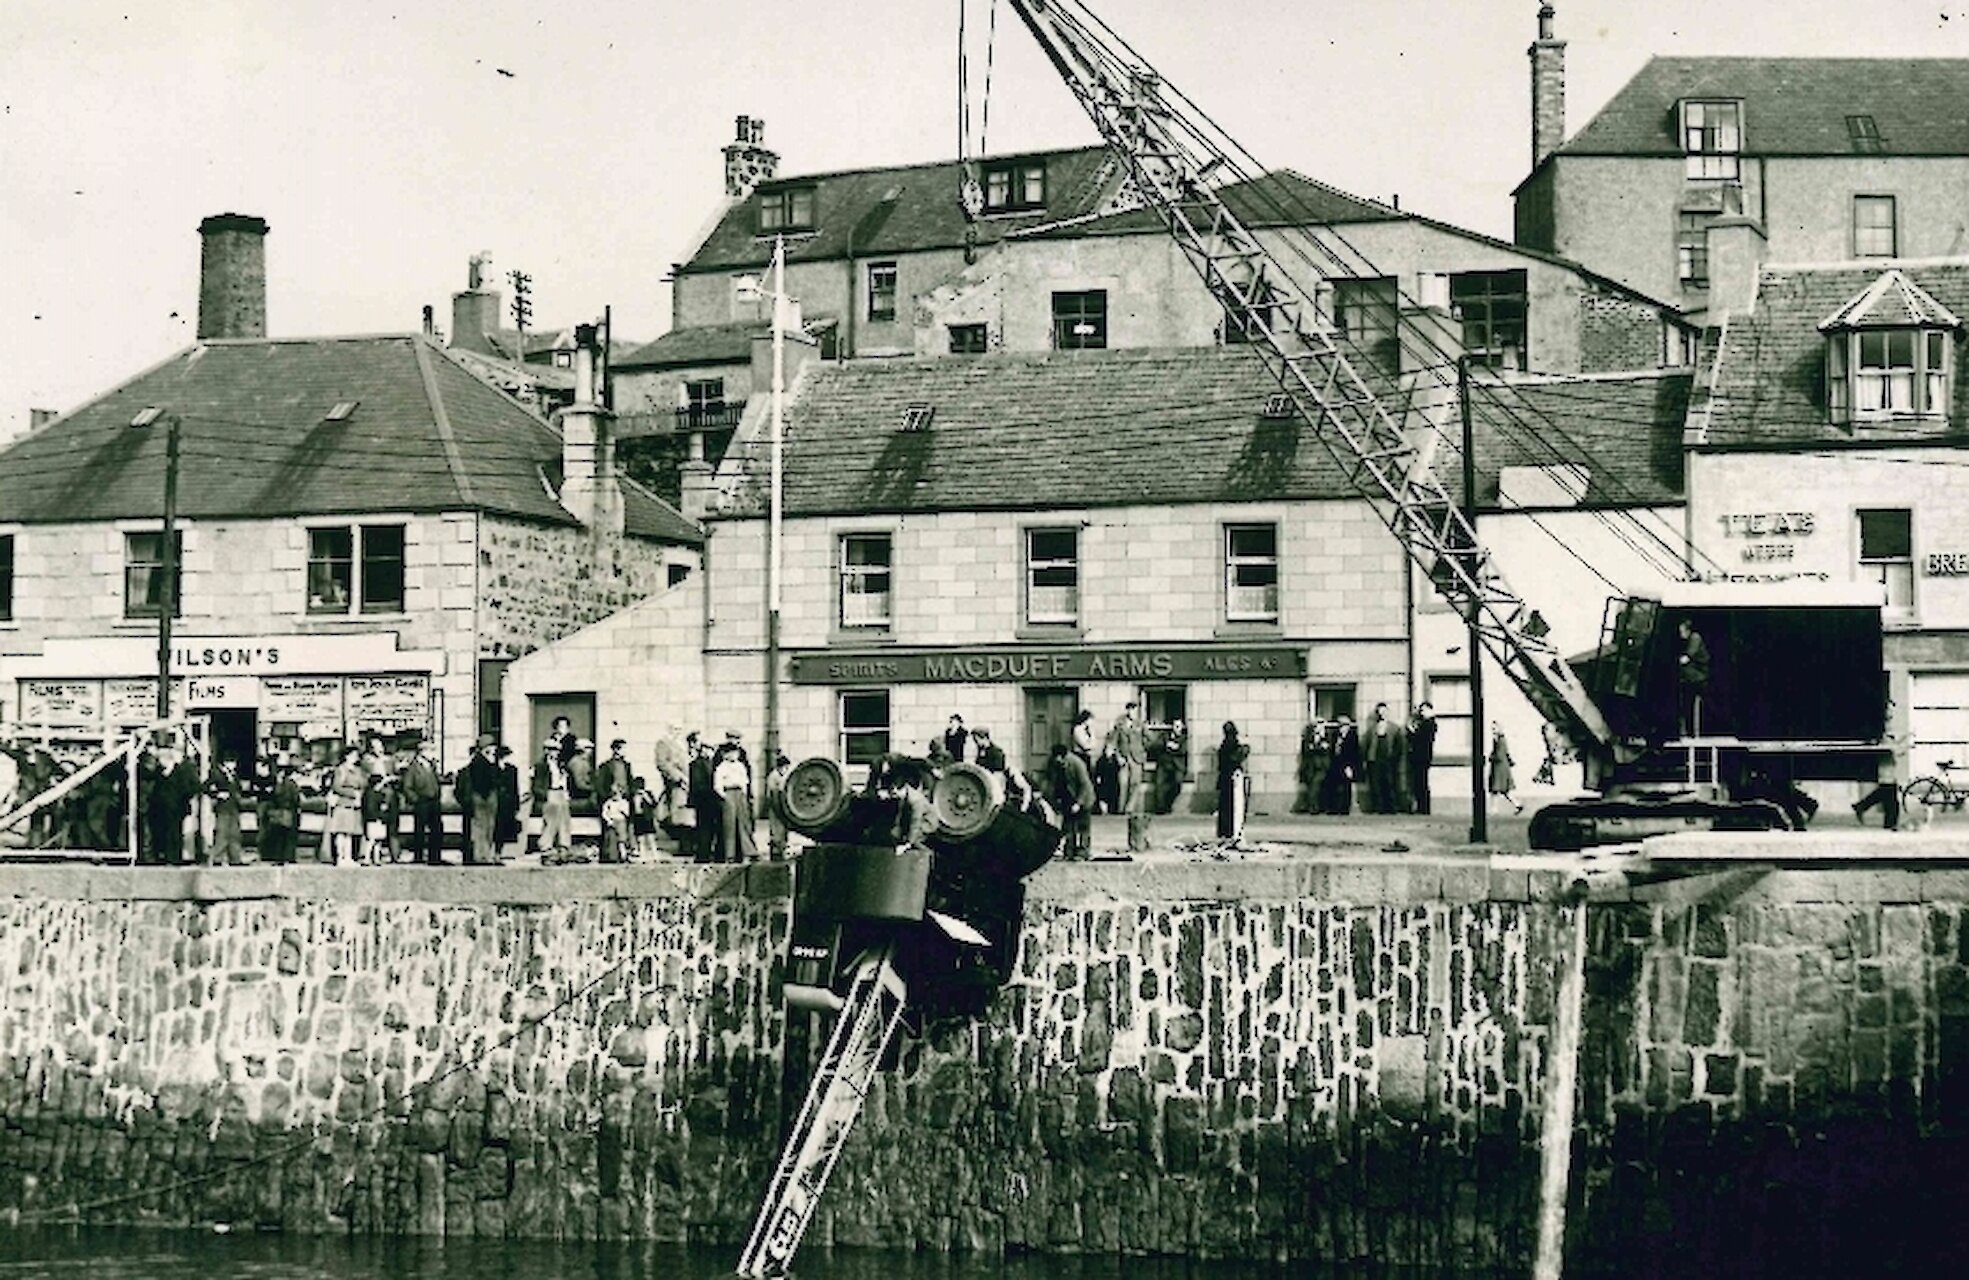 The Macduff harbour works attracted attention